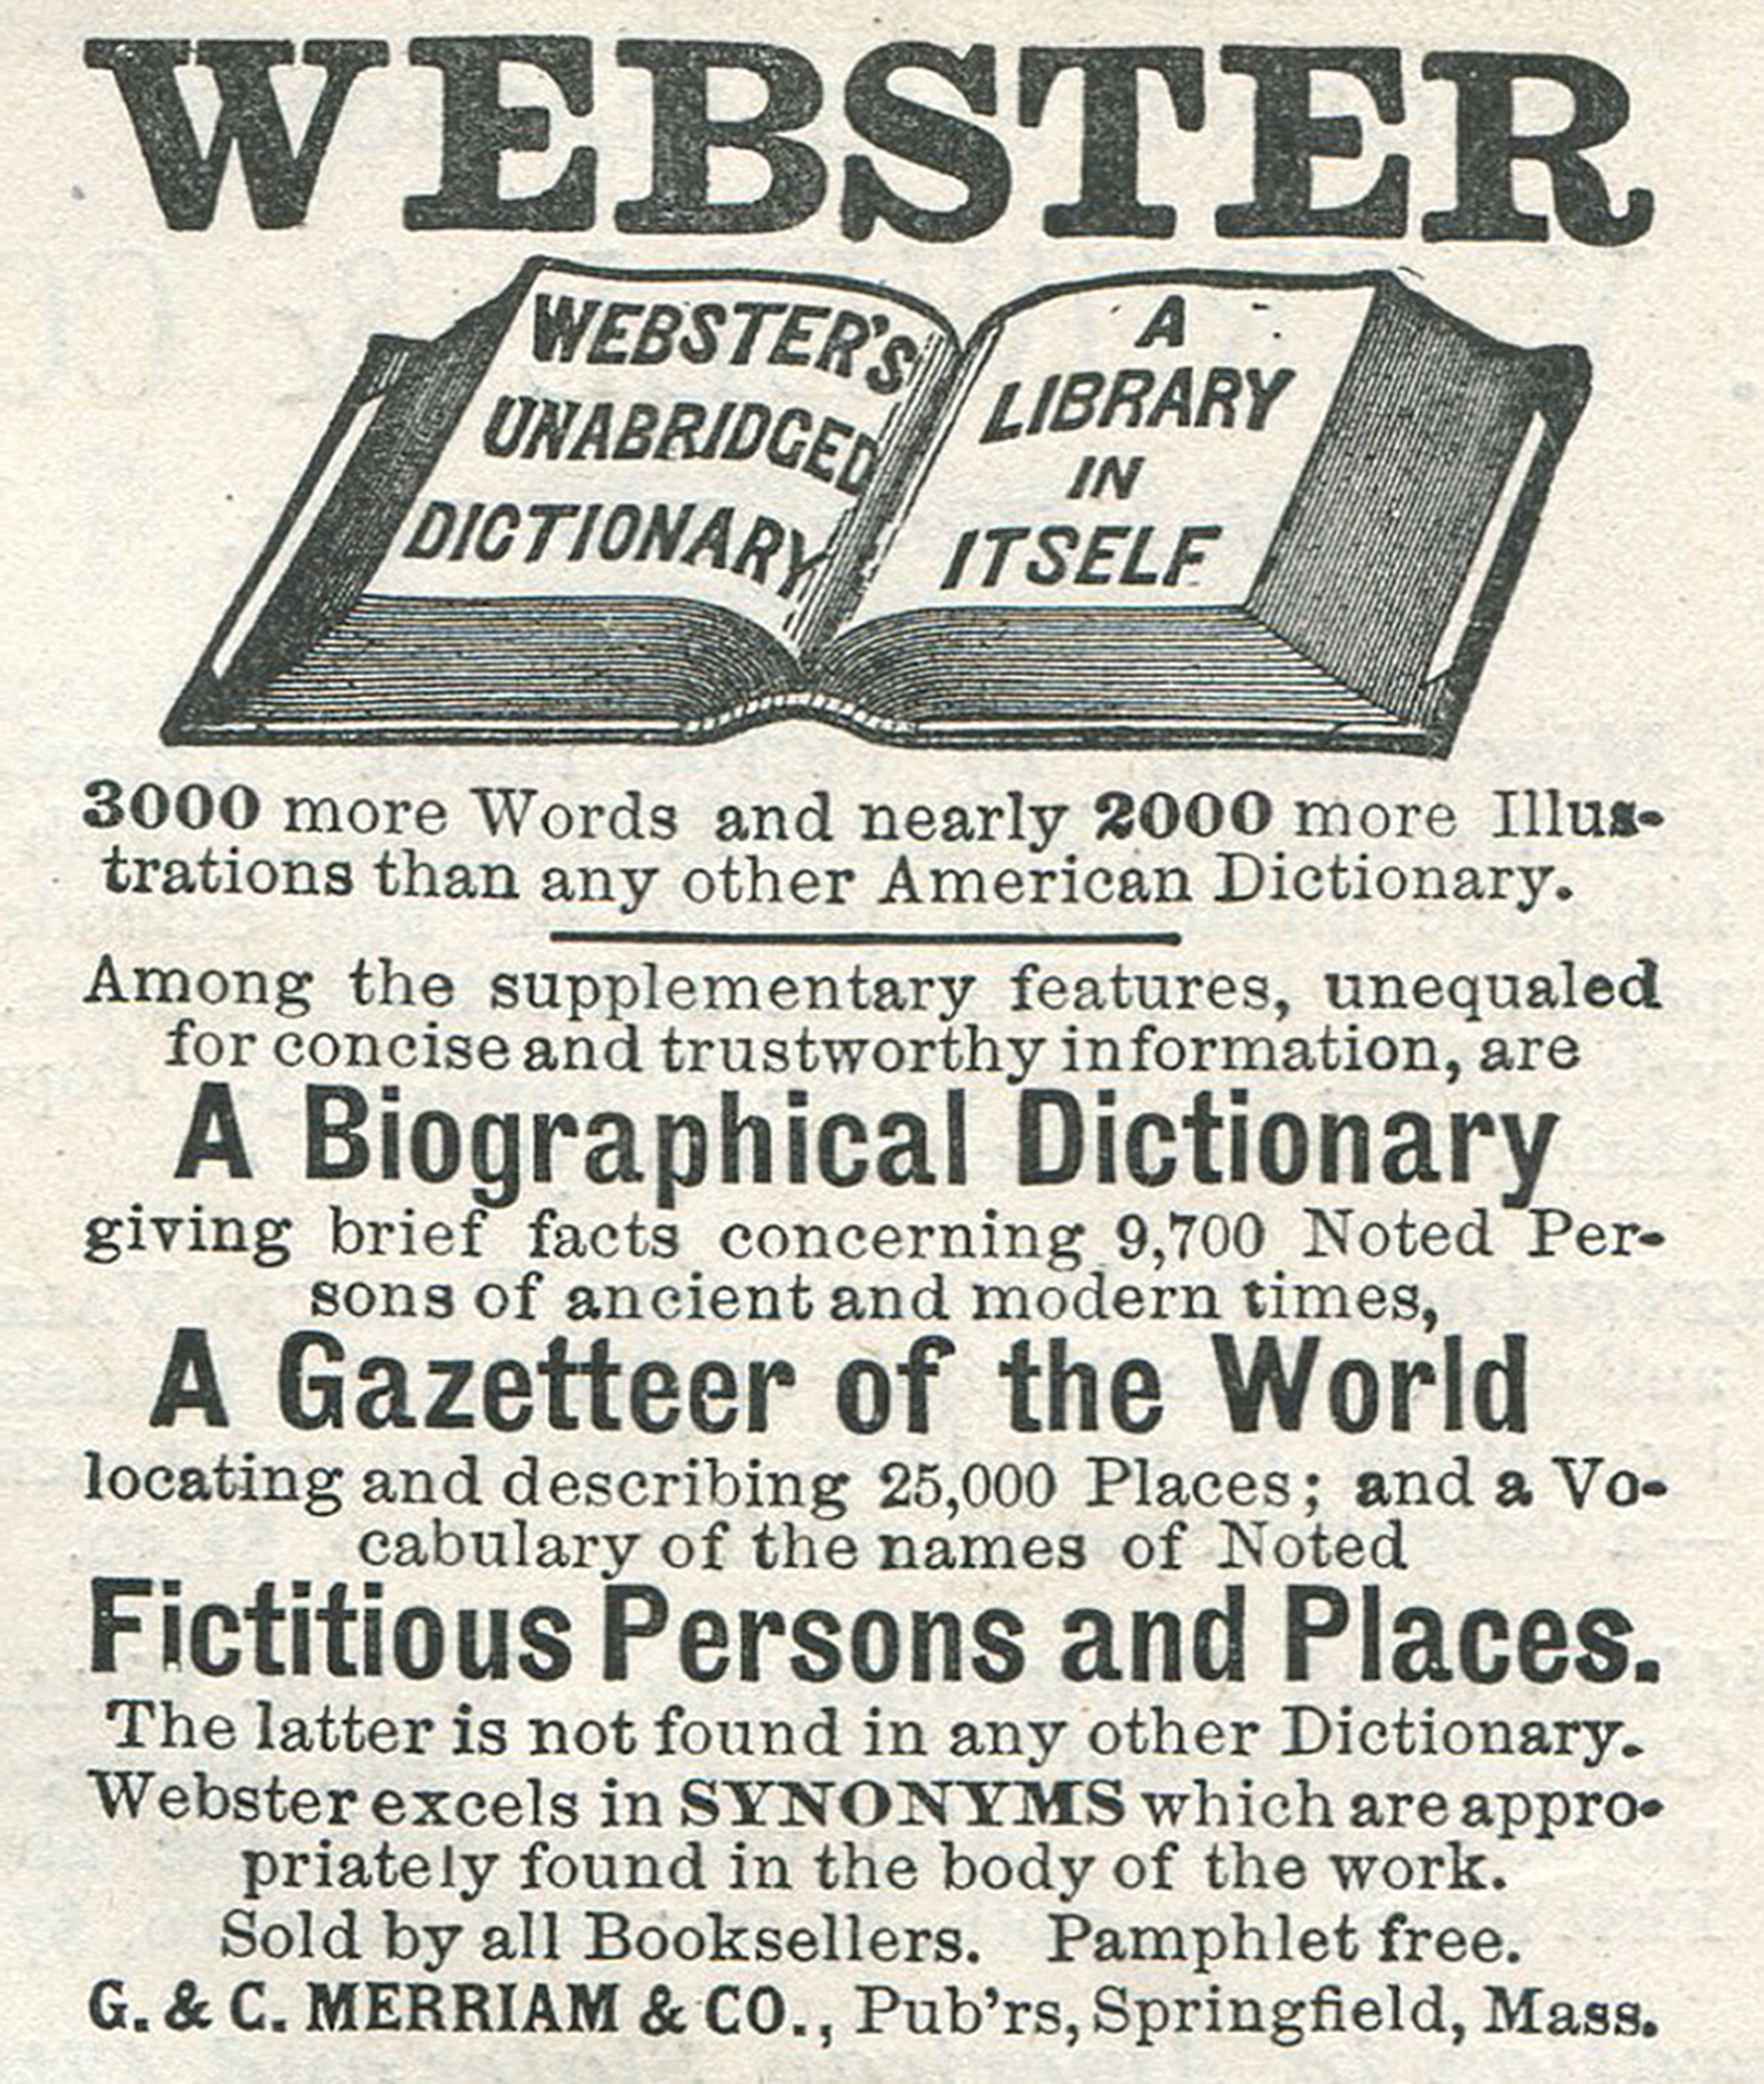 Advertisement for Webster's Dictionary published by the G and C Merriam and Company, Springfield, Massachusetts, 1888. (Jay Paull—Getty Images)